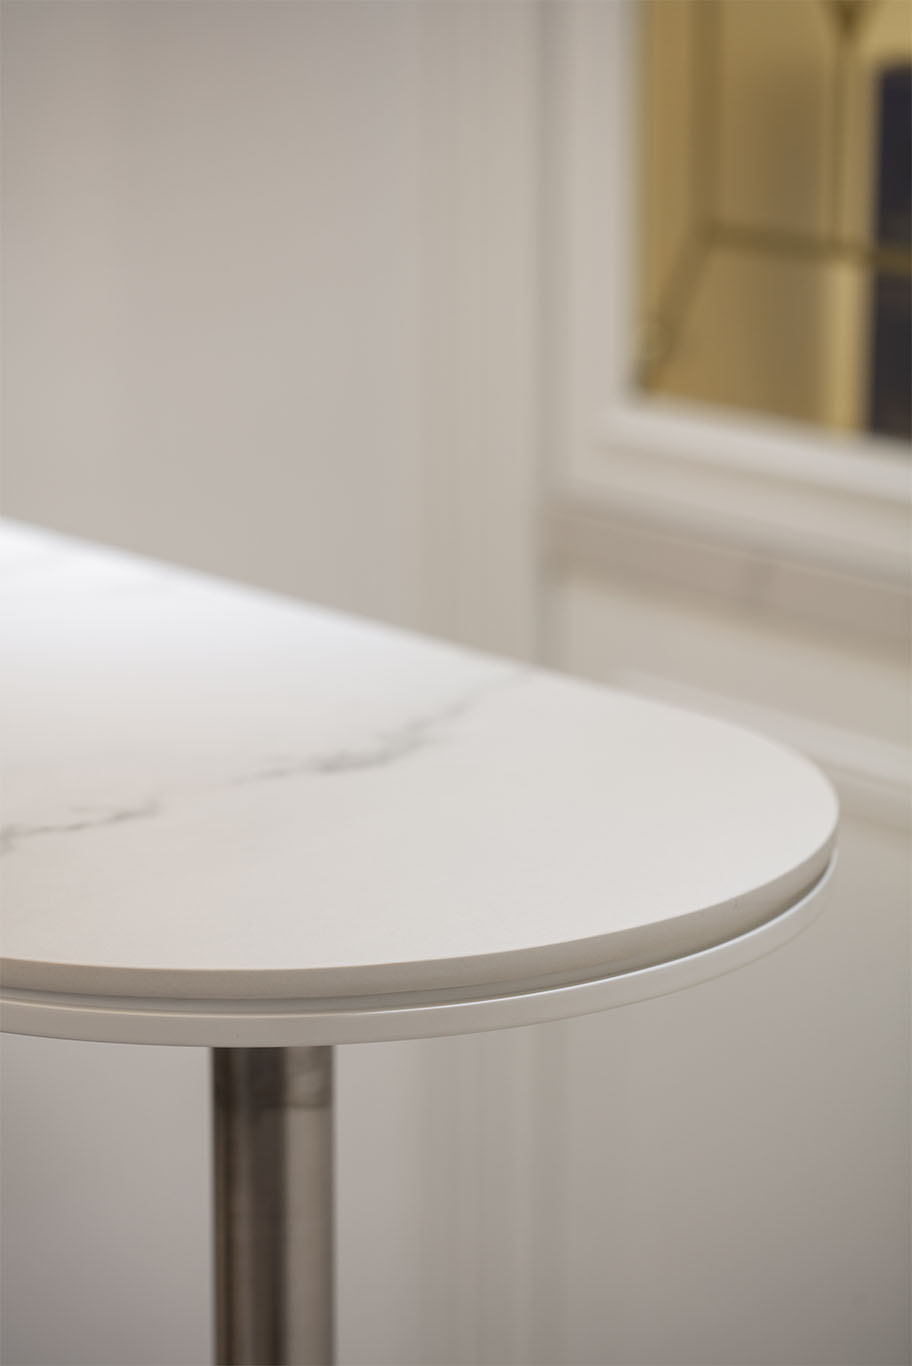 MIEUX The White Royale white marble table mieux interior design